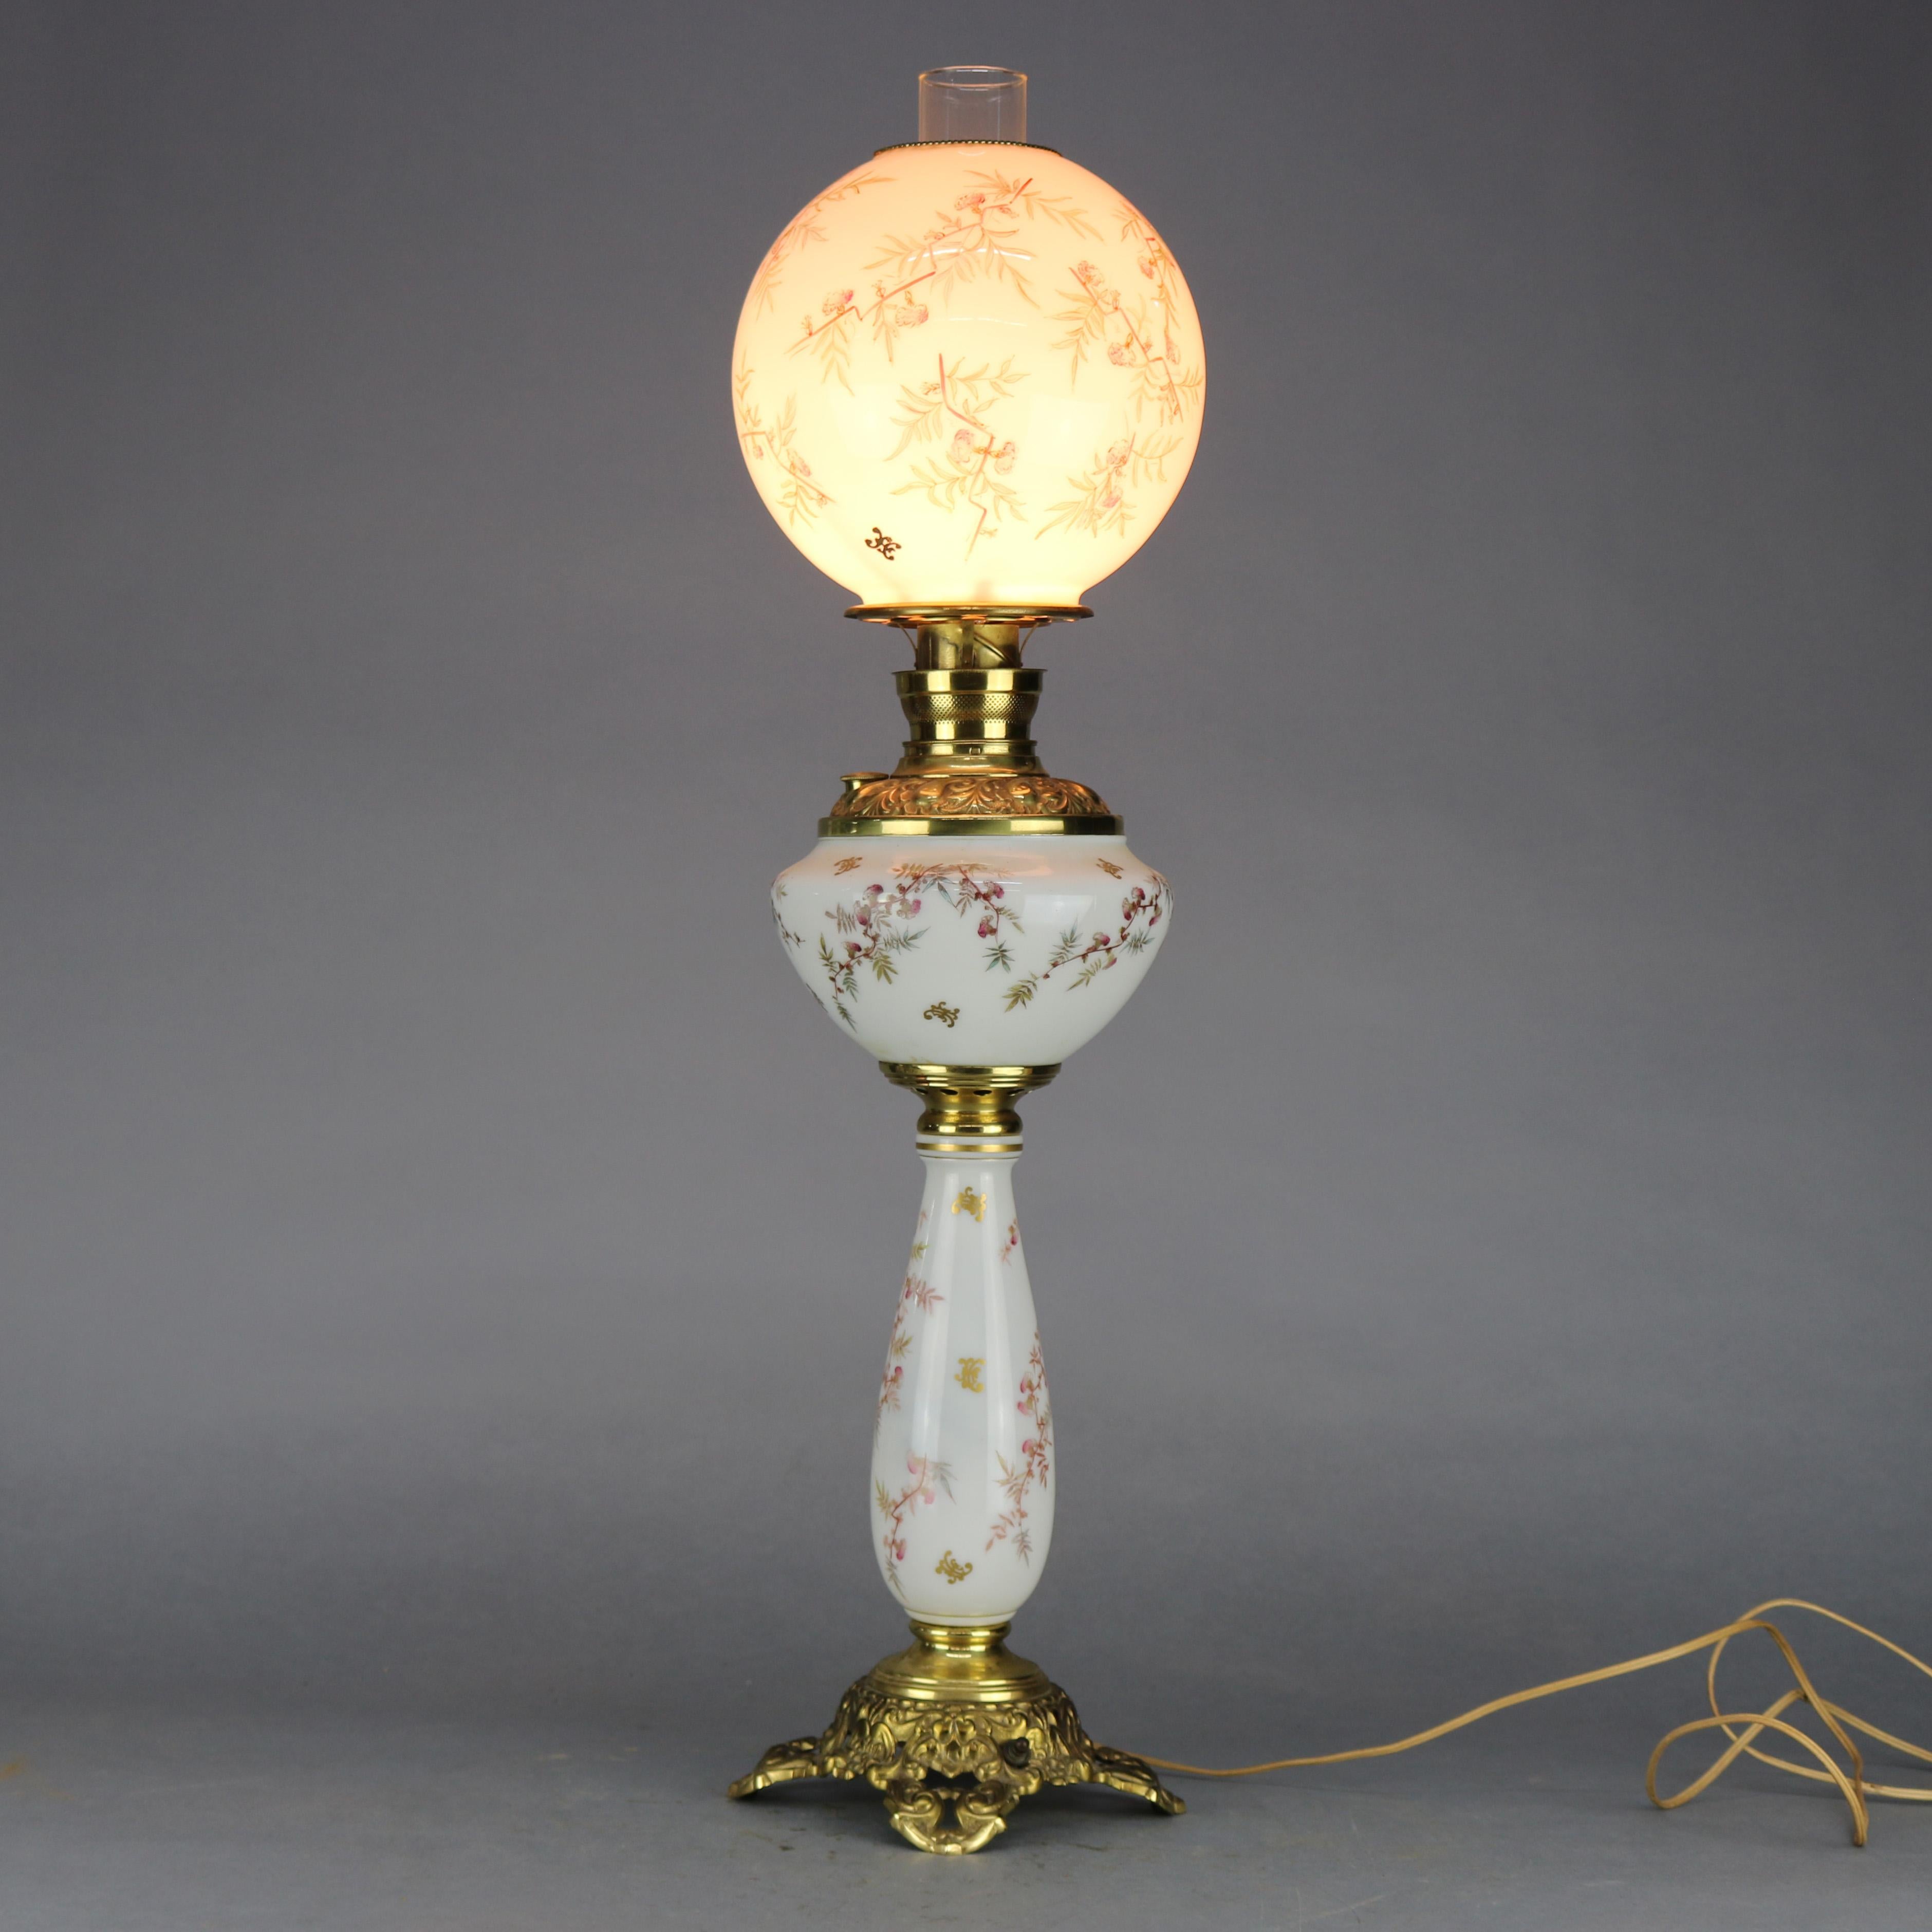 American Antique Hand Painted Gone with the Wind Parlor Lamp, circa 1890